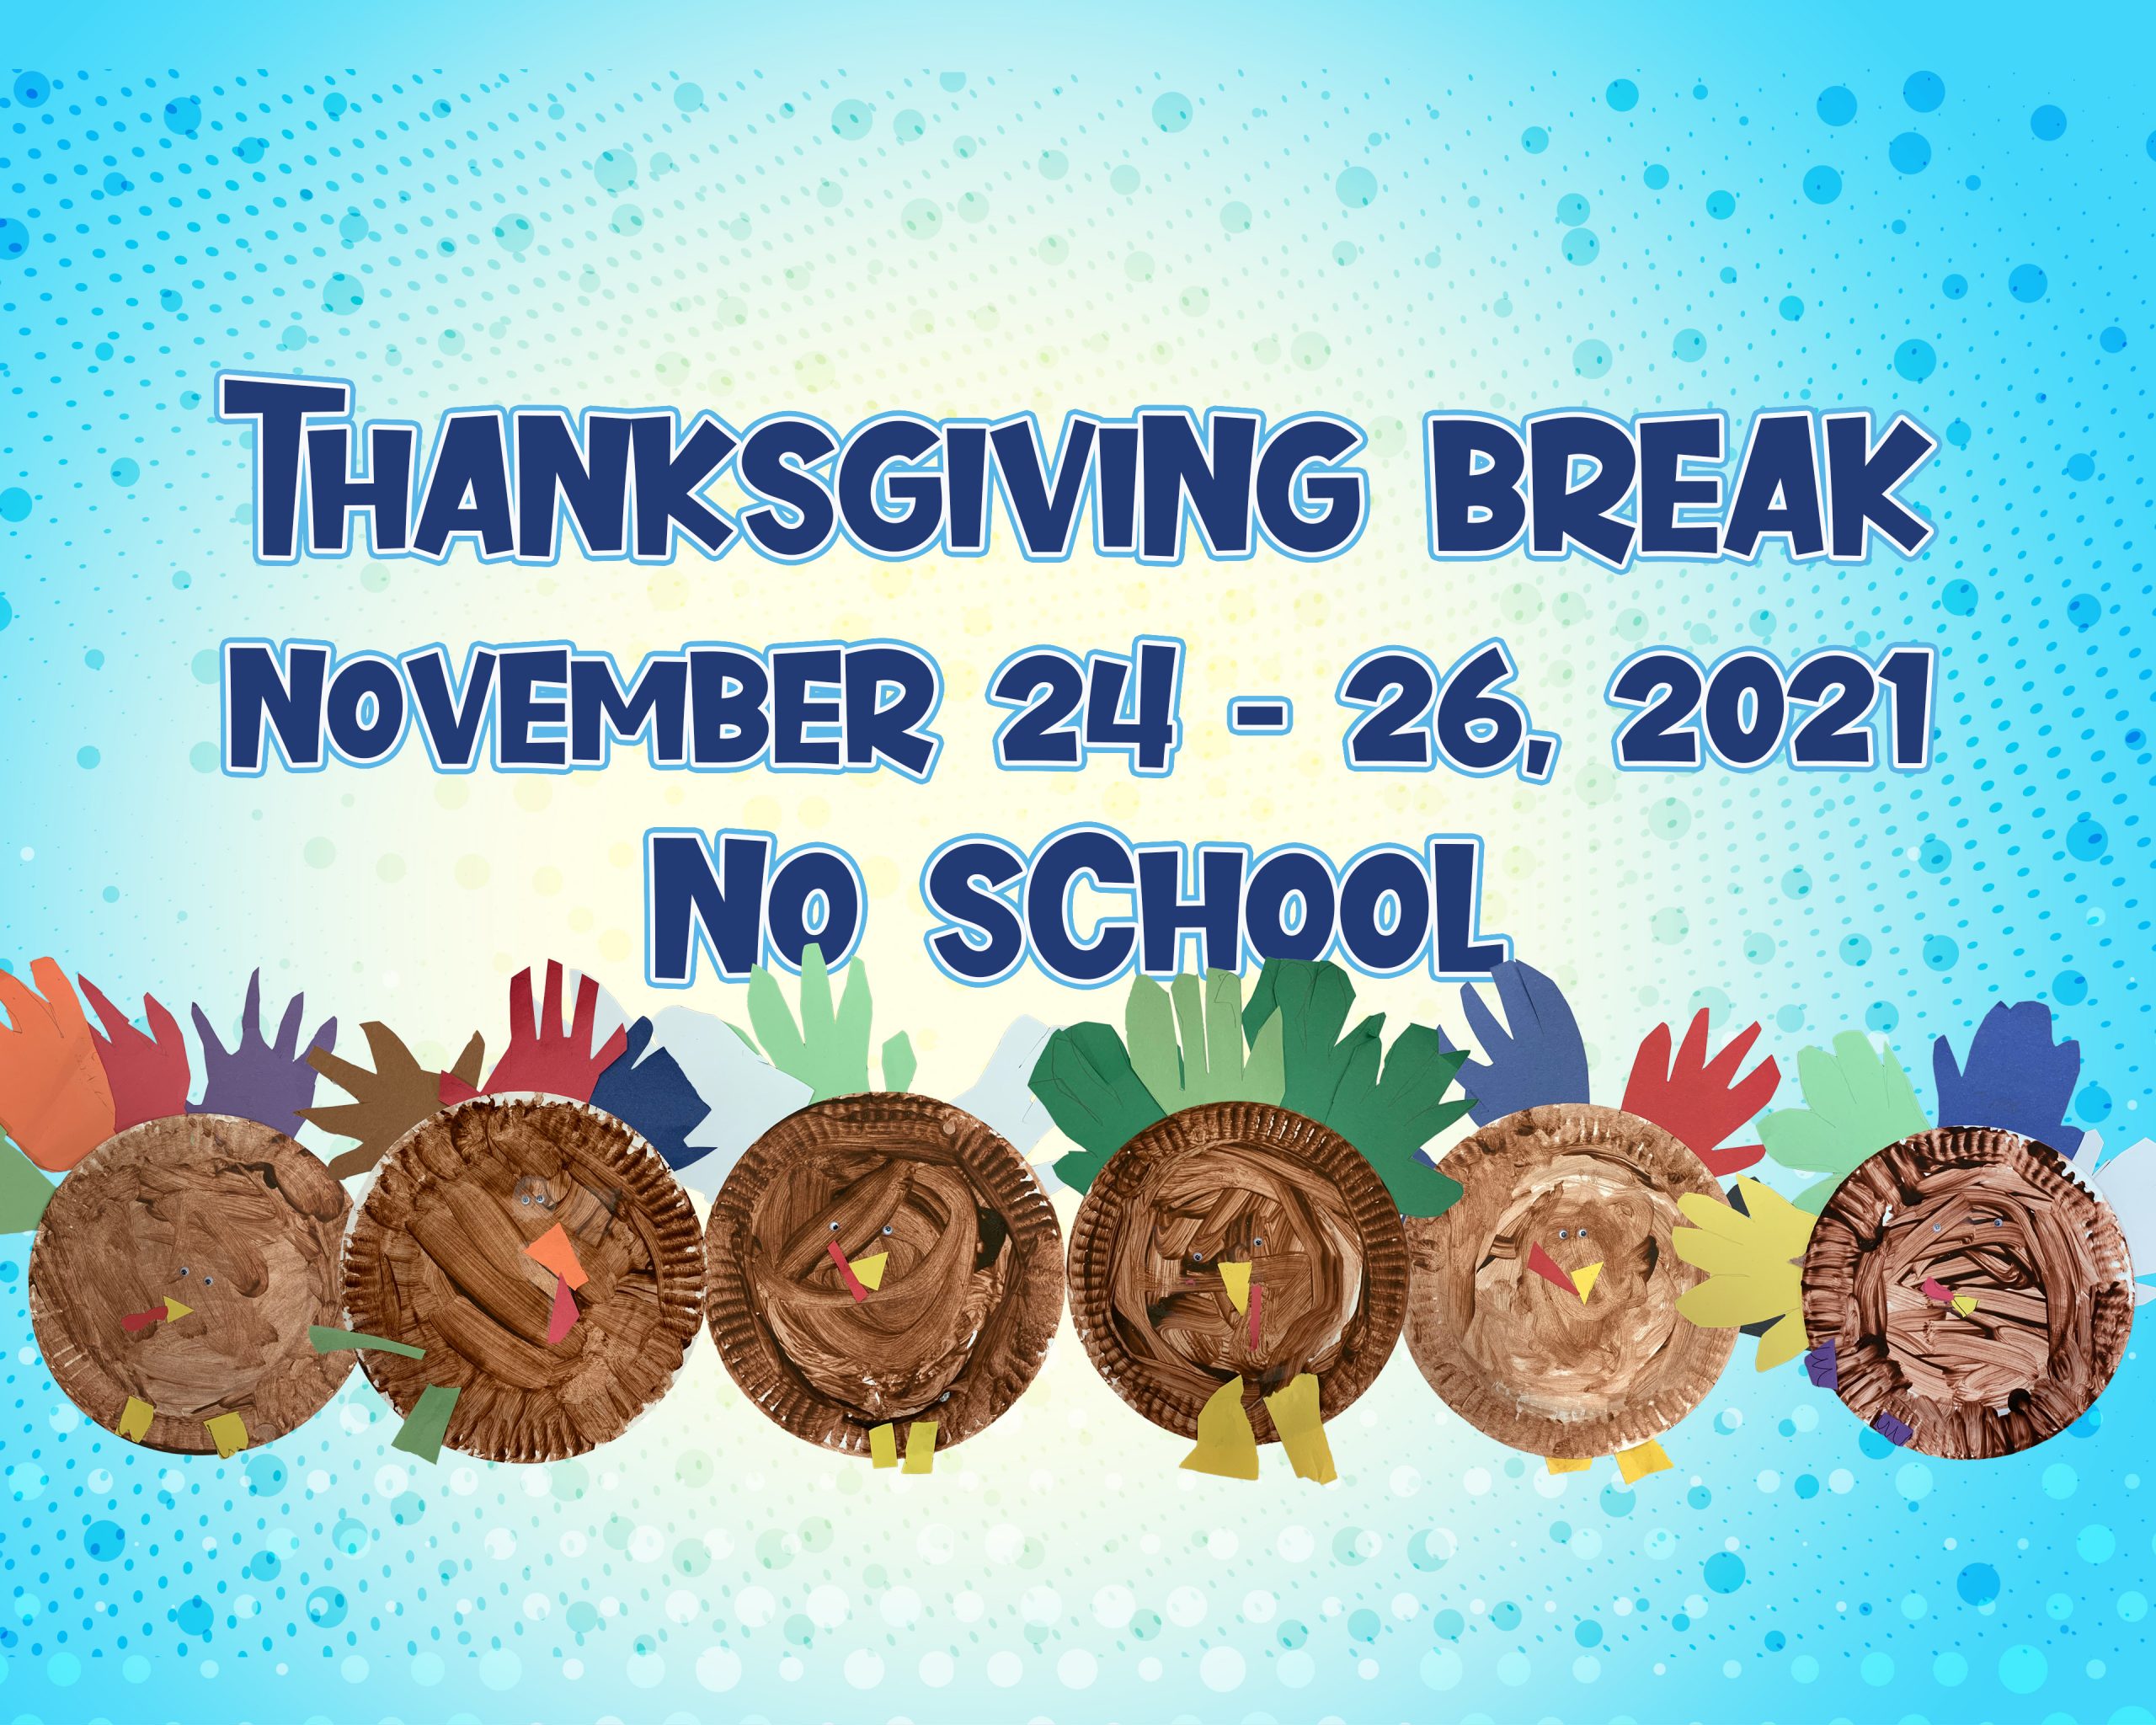 A graphic has dark blue text, “Thanksgiving Break, November 24-26, 2021. No school,” on a lighter blue background with even lighter blue bubbled circles surrounding it. On the bottom portion of the text, there are hand made, child arts and crafts of turkeys. The turkeys are made of brown painted paper plates with small, plastic eyes and a paper cut-out yellow beak. The turkey feathers are made from the shapes of a child’s hand.